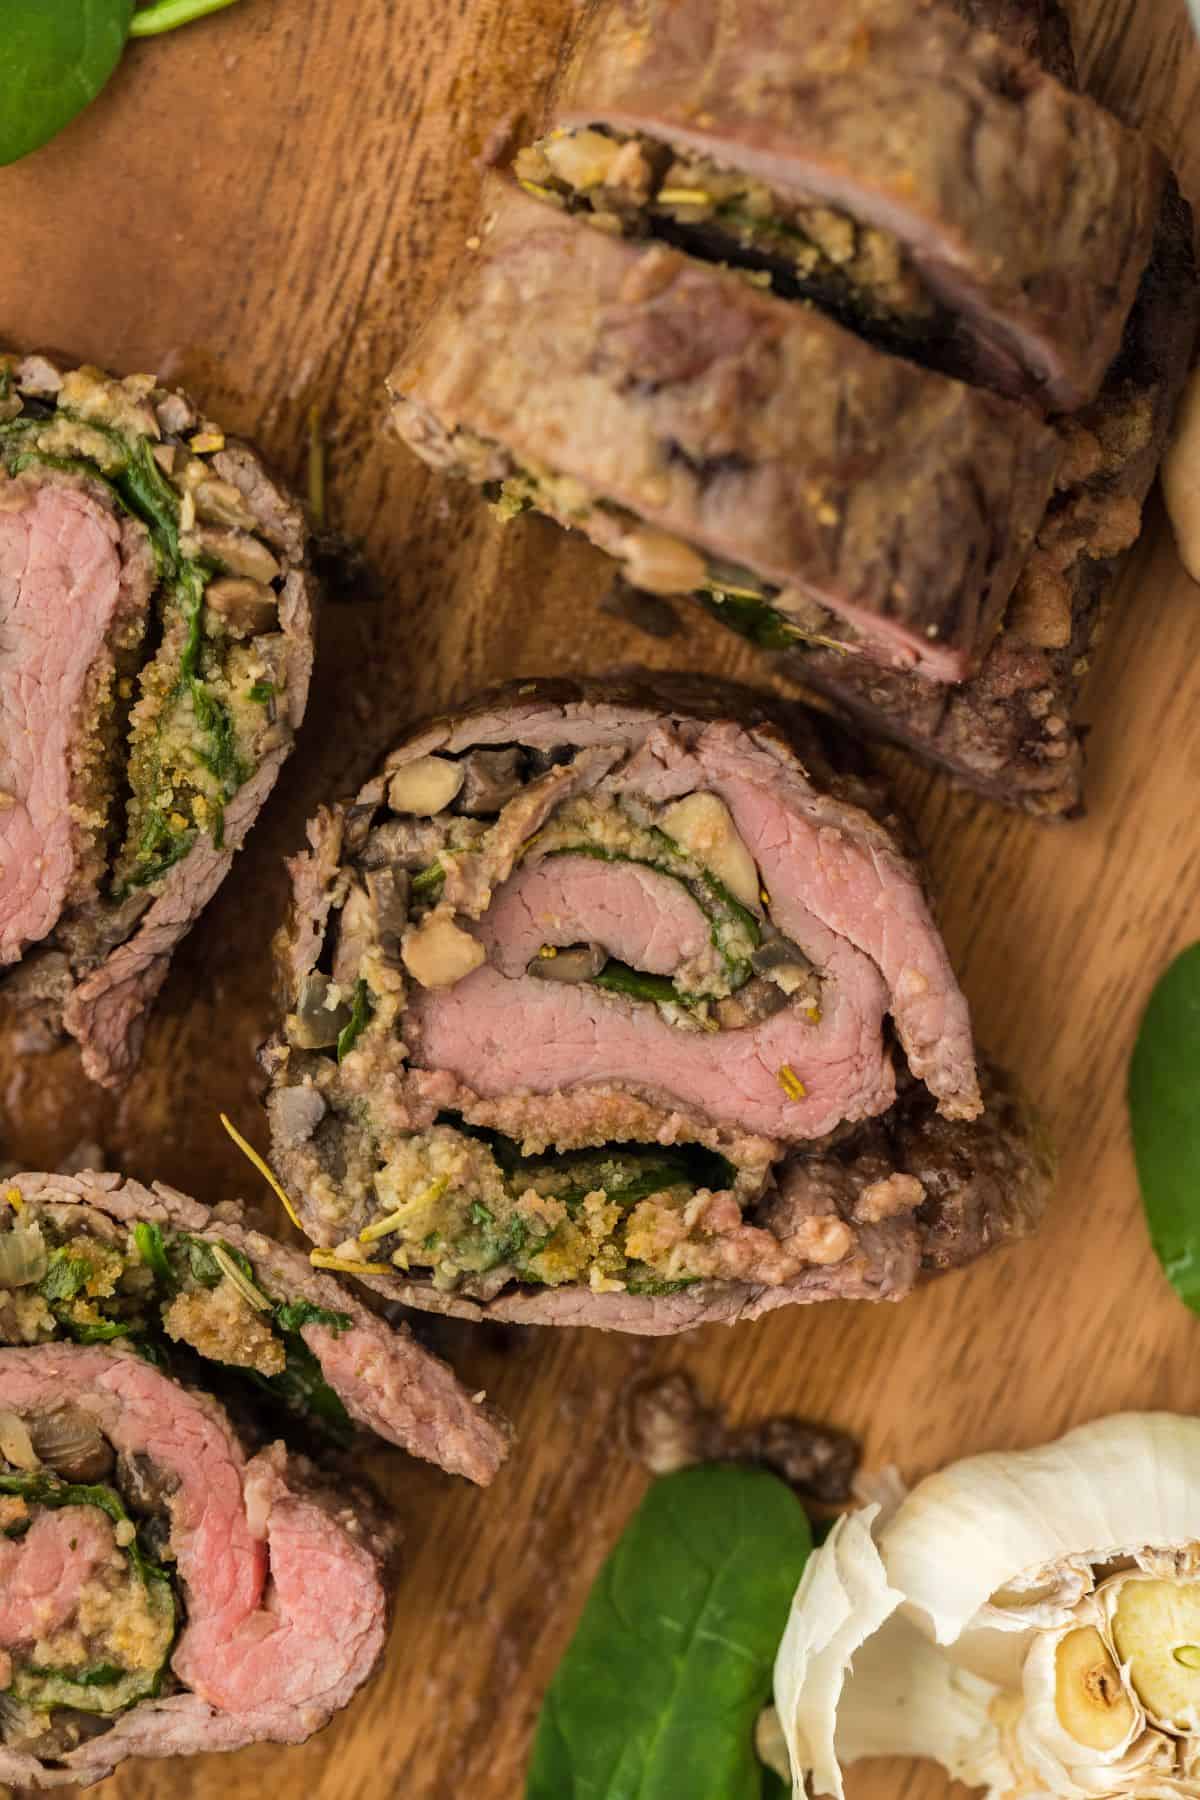 Closeup of several sliced stuffed flank steak with spinach and mushroom stuffing on a wooden cutting board. There are fresh spinach leaves and a head of garlic next to it